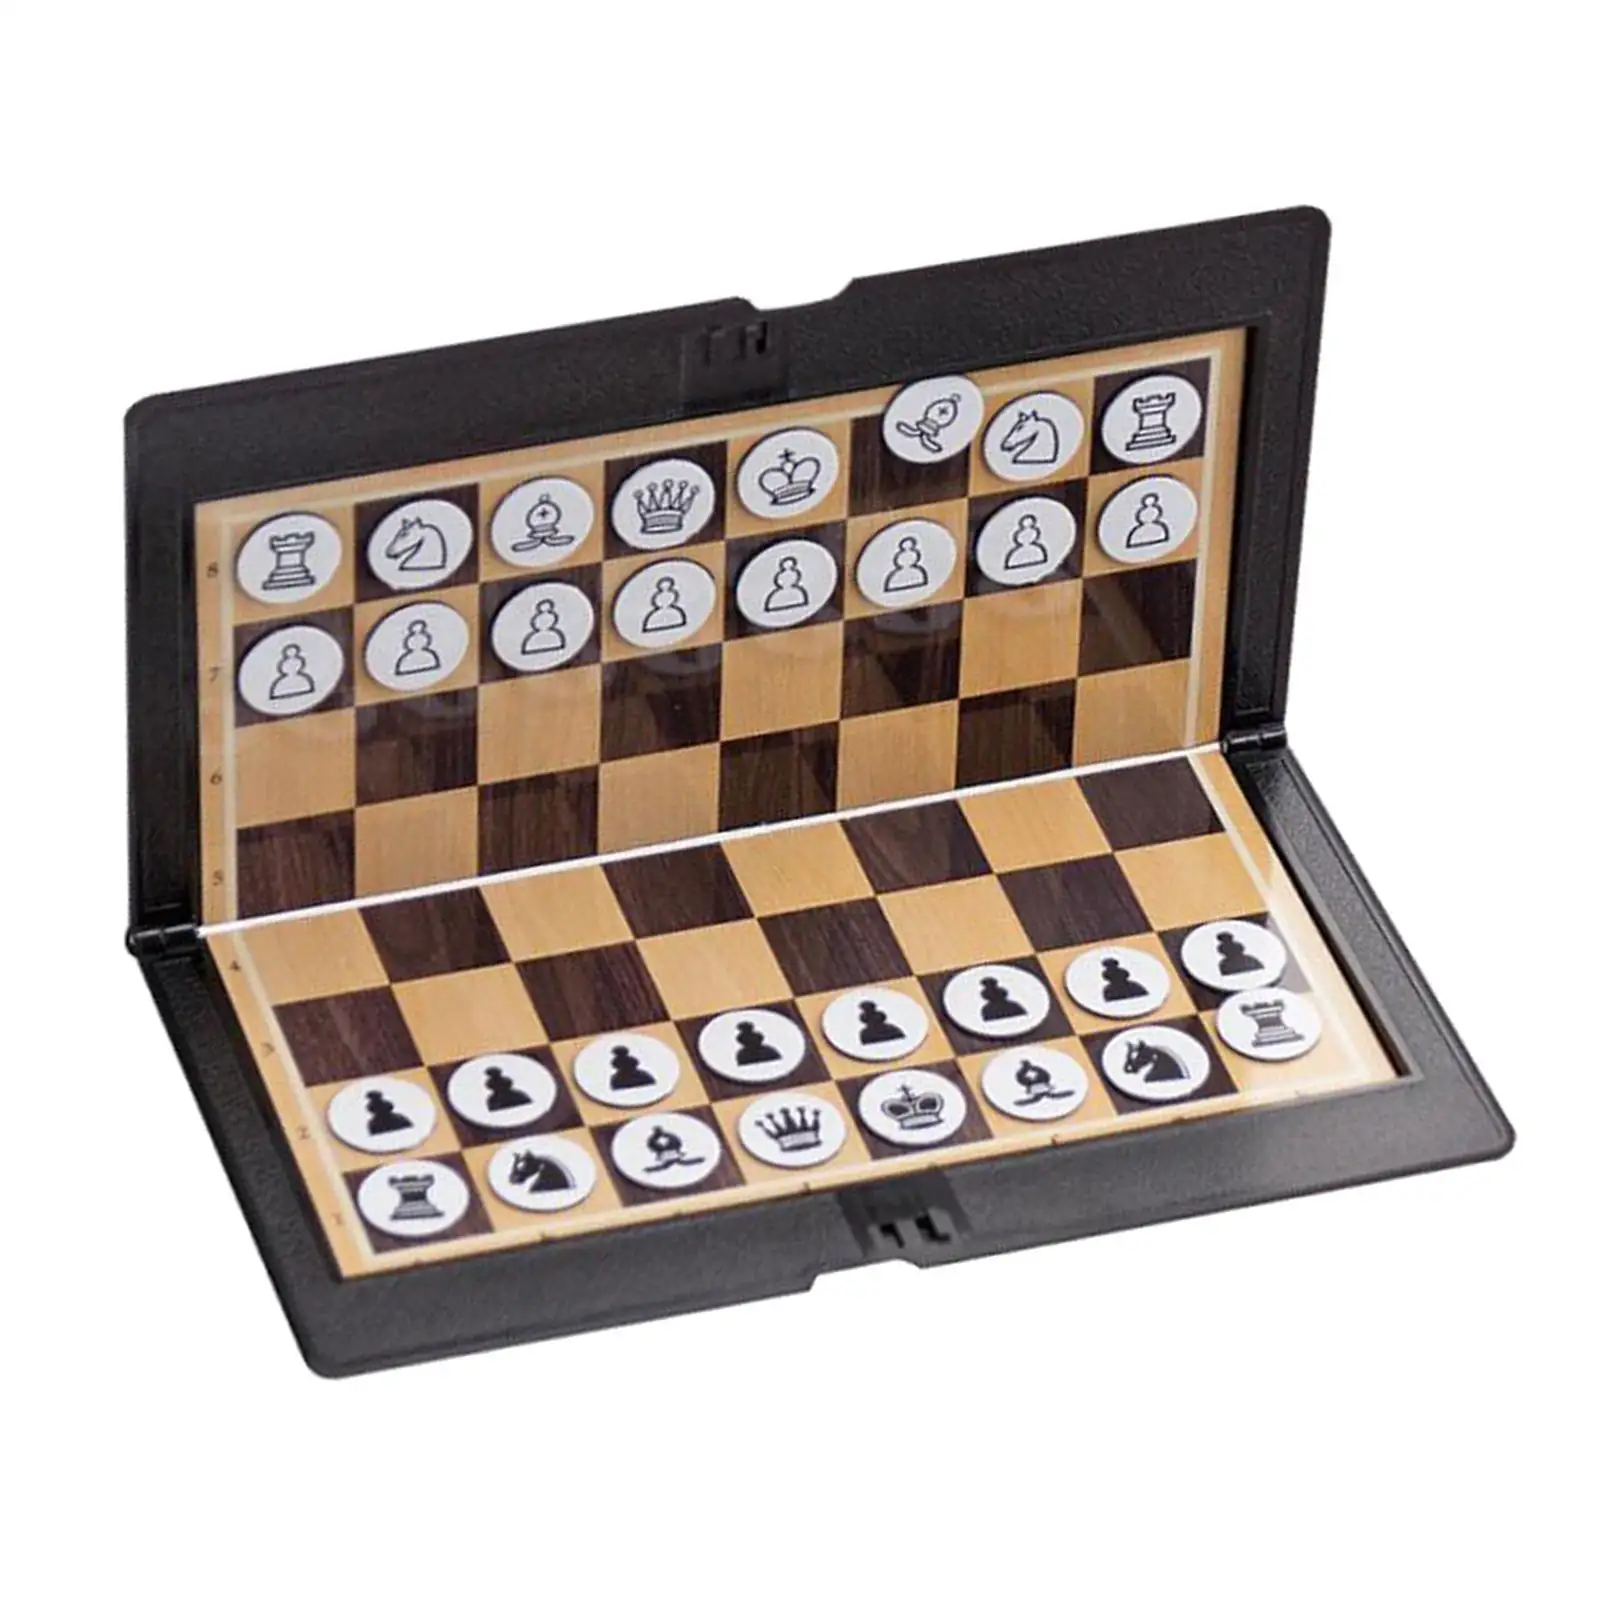 Foldable Chessboard Mini Size Chess Set Travel Portable Wallet Pocket Chess Board Game Family Game